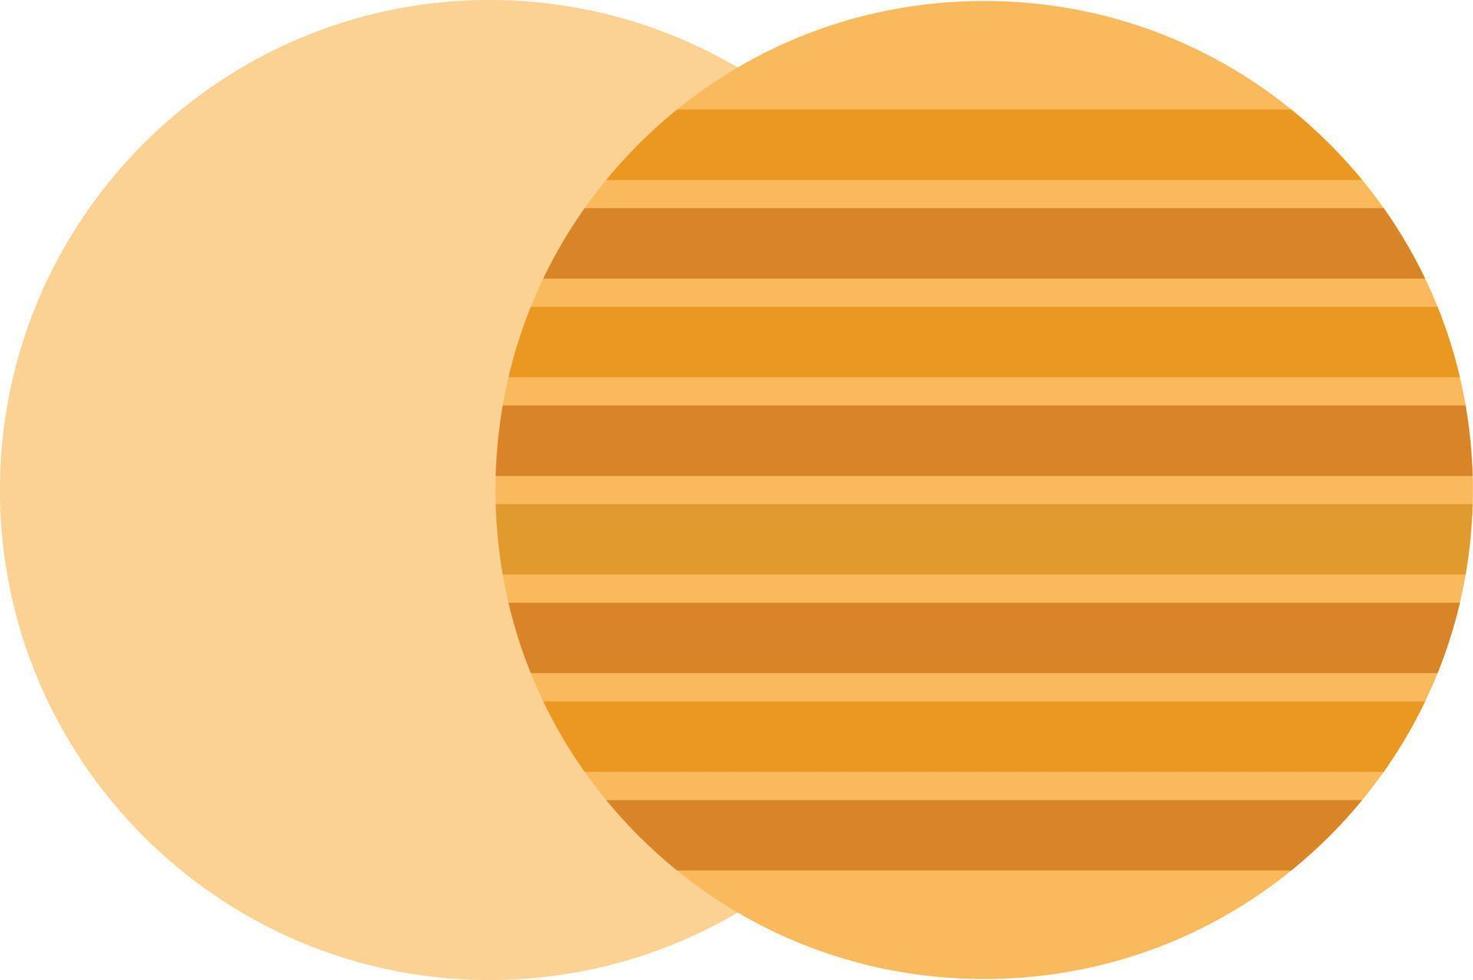 Eclipse Flat Icon vector